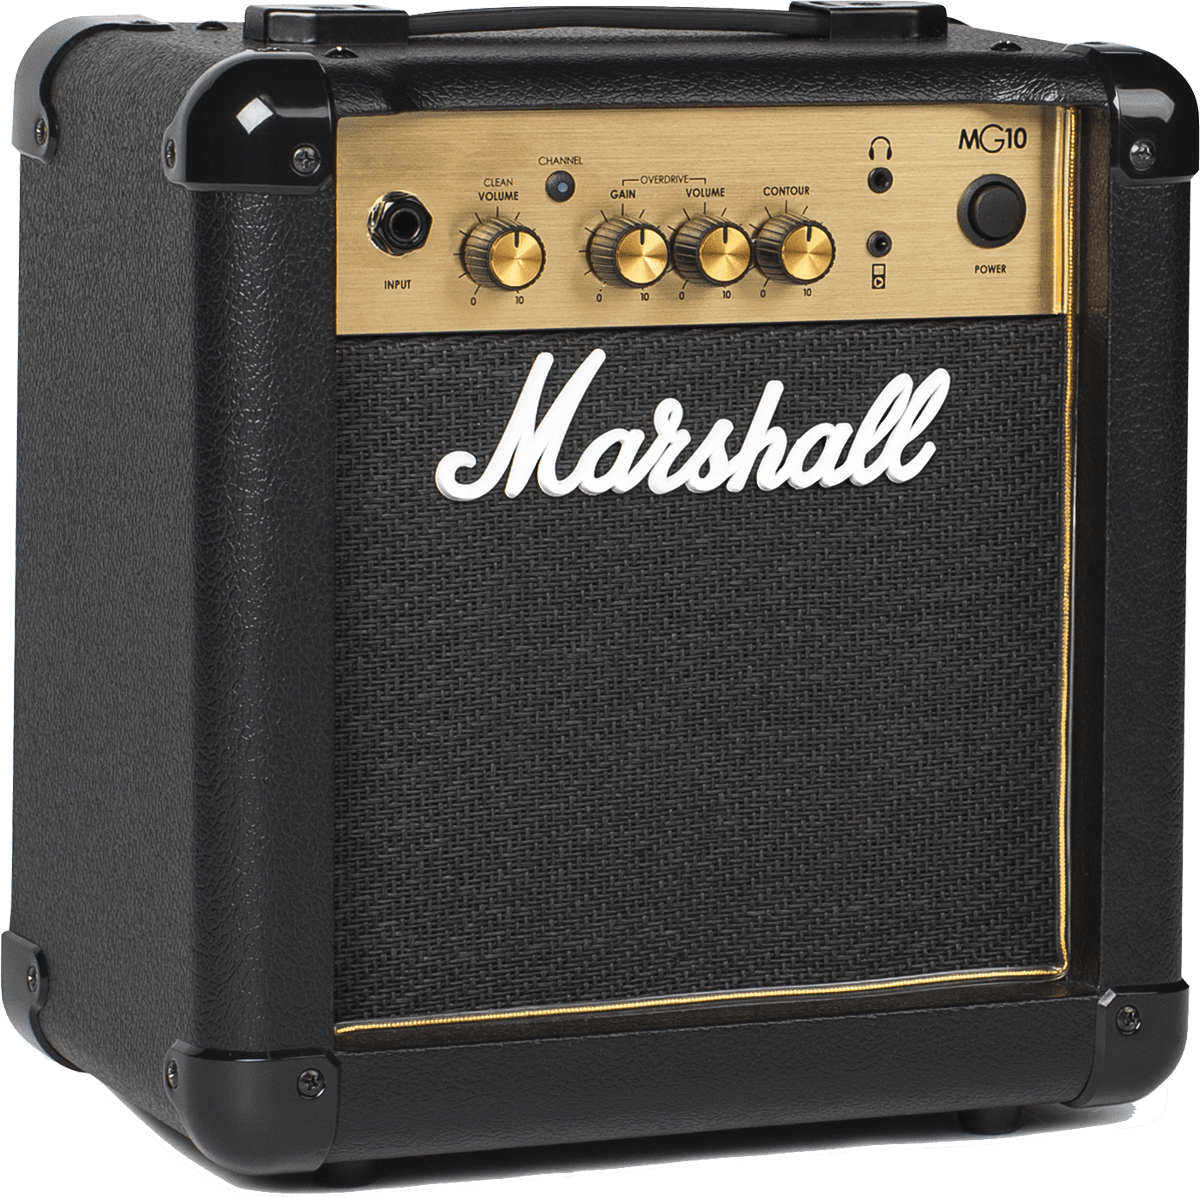 Eastone Tl70 +marshall Mg10g Combo 10 W +housse +courroie +cable +mediators - Black - Electric guitar set - Variation 6